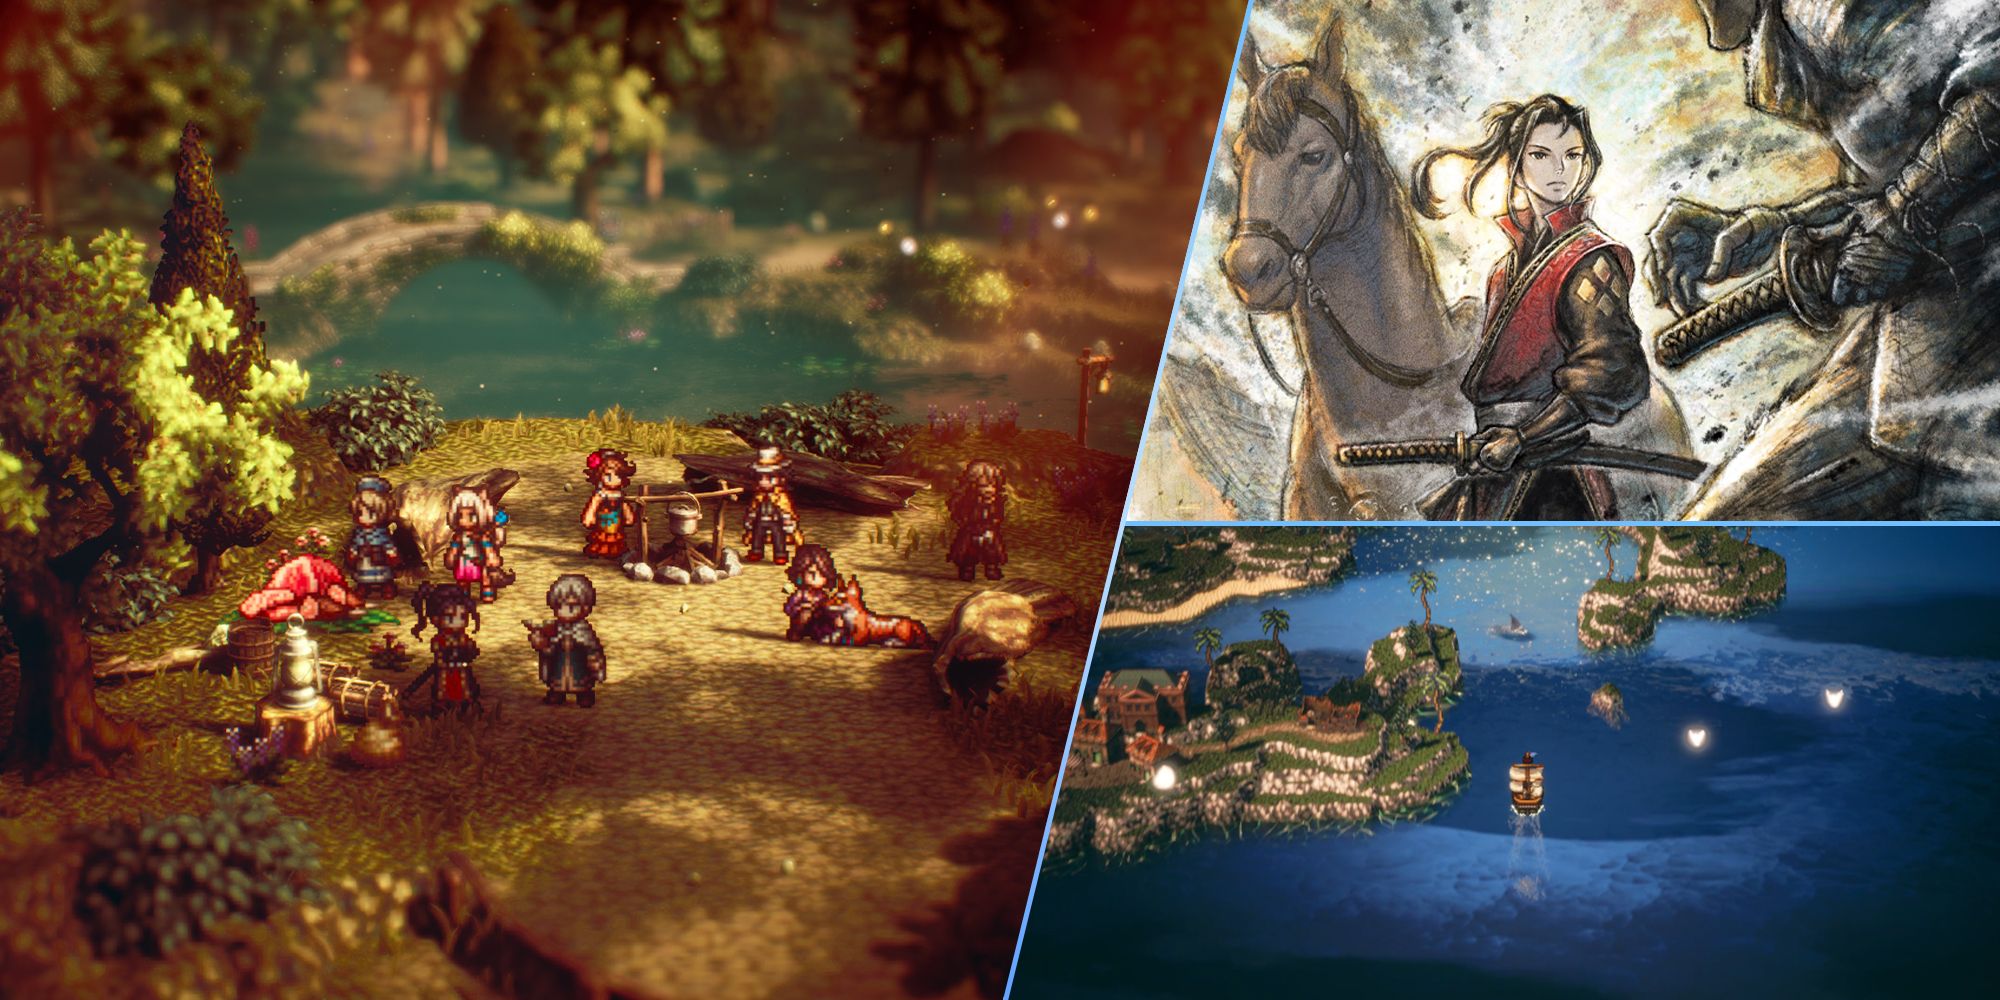 Octopath Traveler 2 Best Daylight Path Actions Featured Image with Hikari and the rest of the party members around the campfire, a photo of the Grand Terry, and Hikari's official art